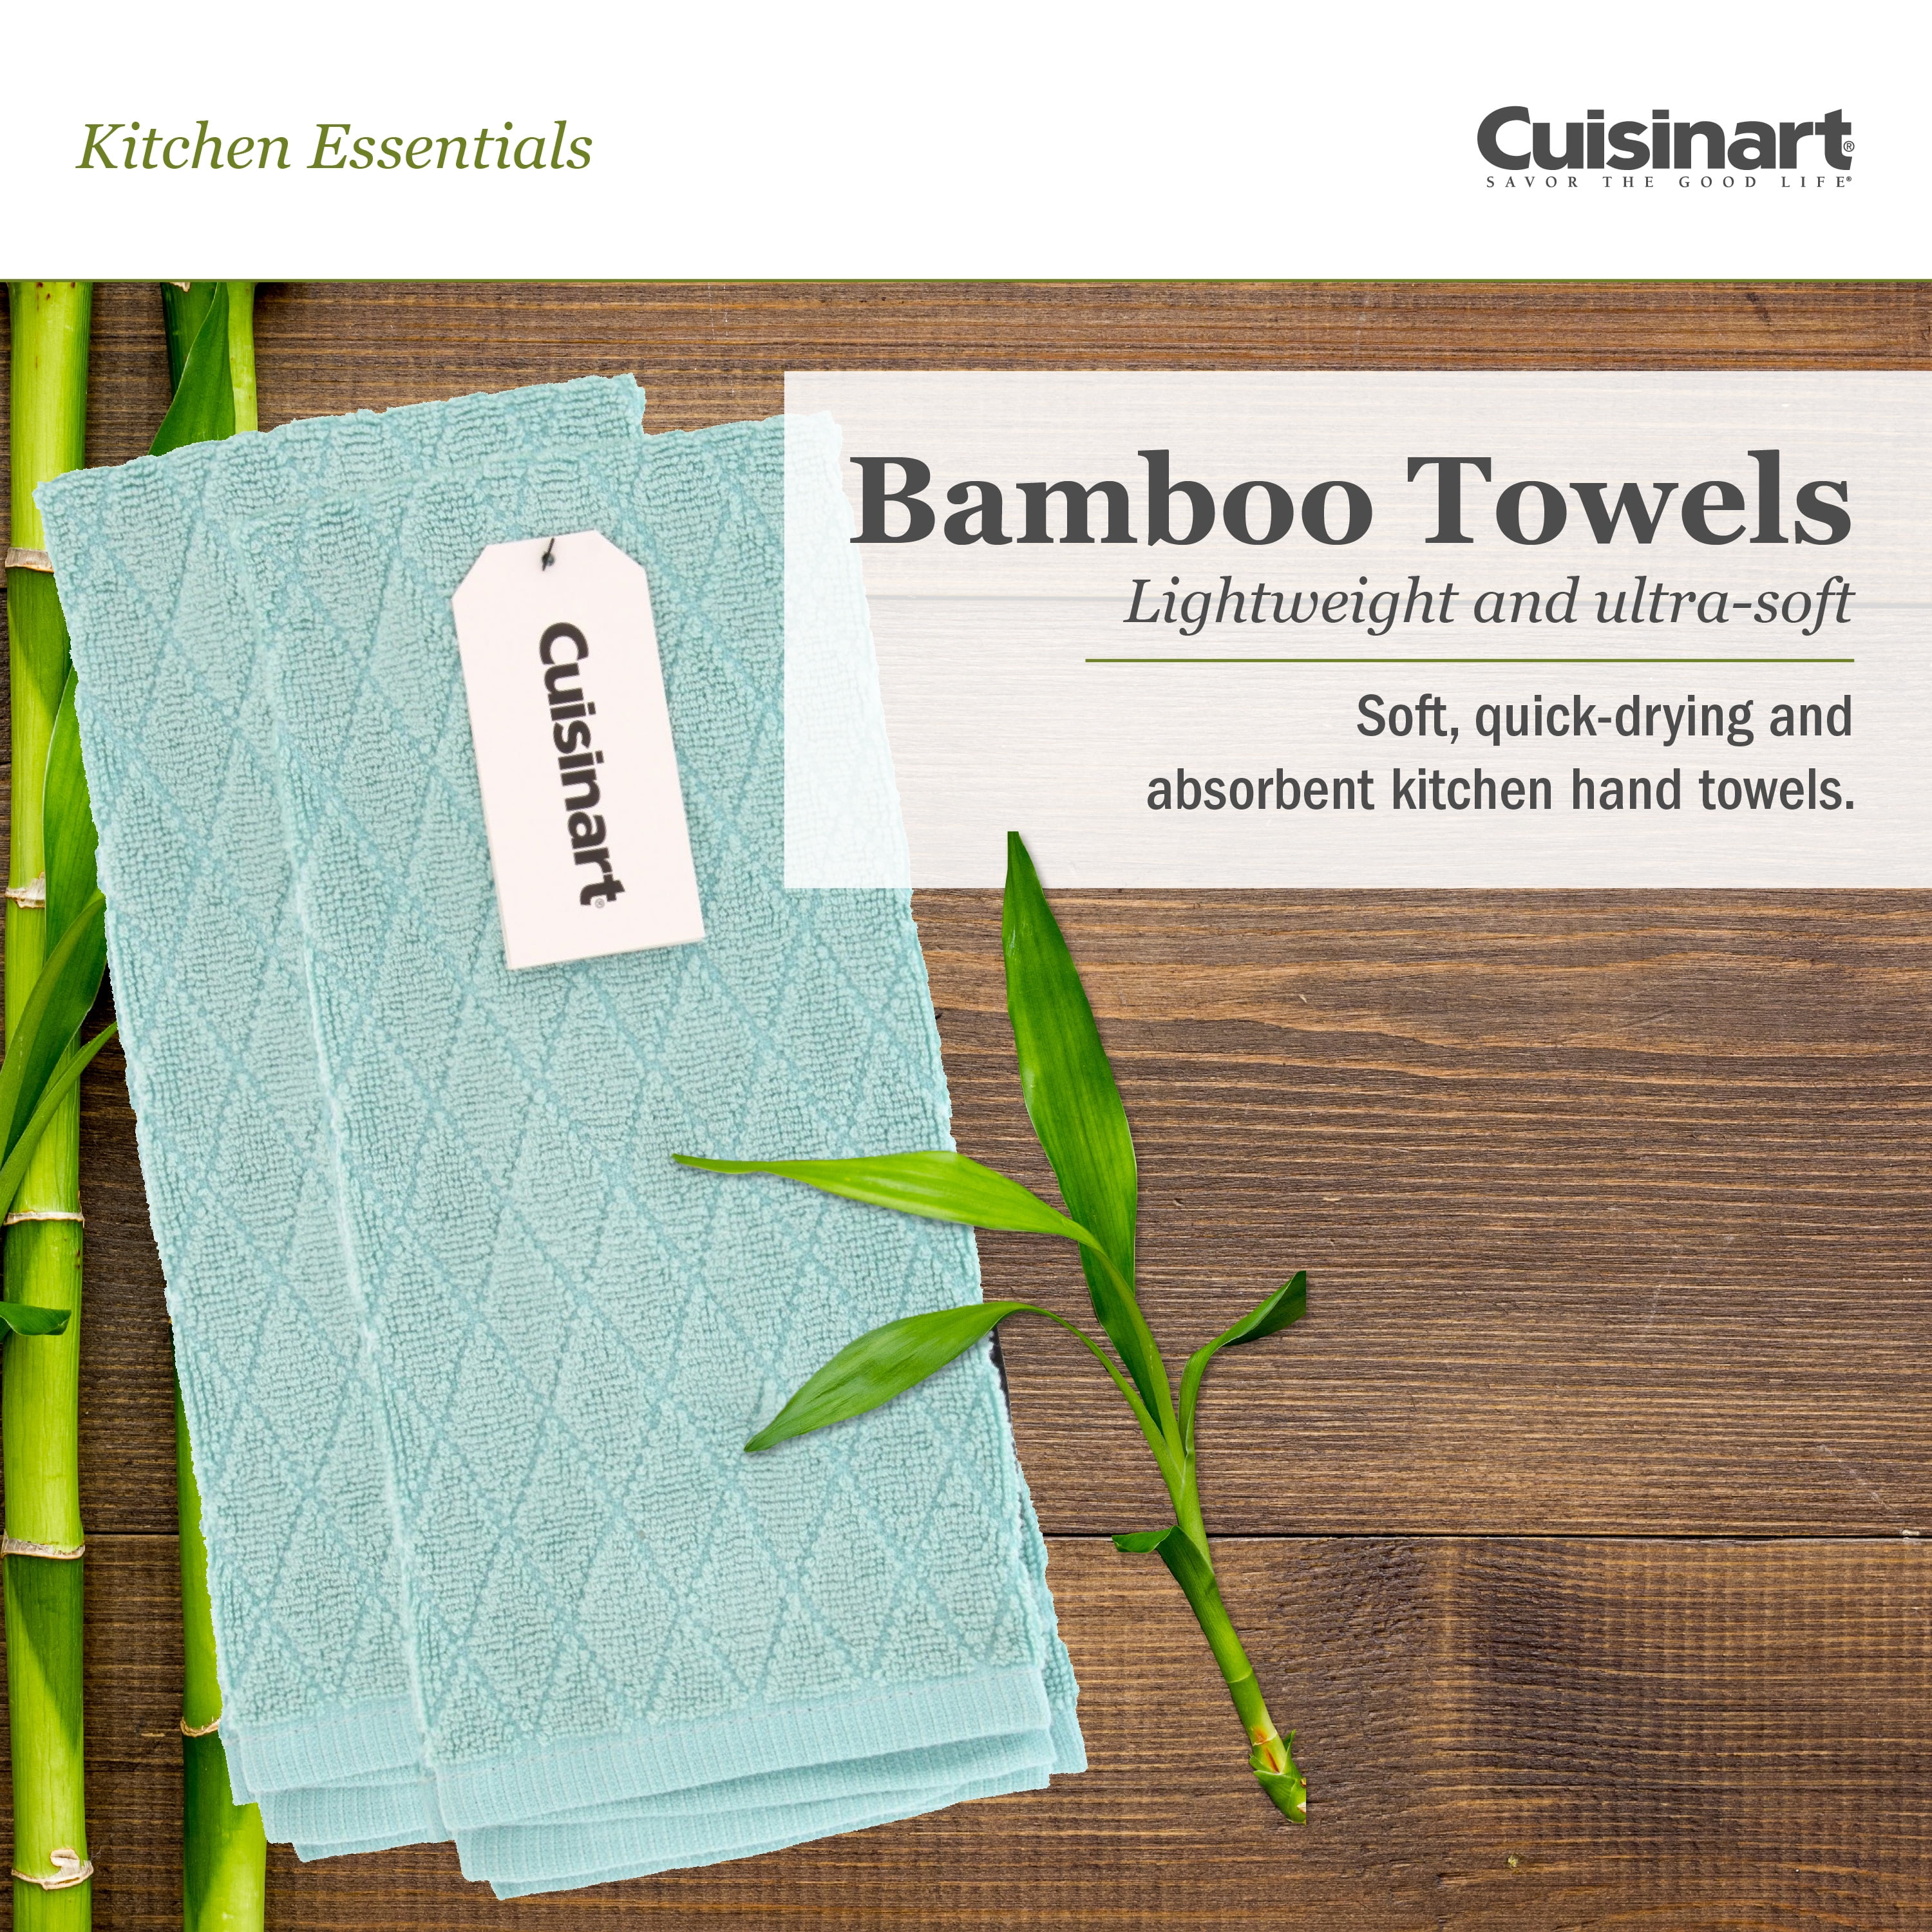 Cuisinart Oversized Kitchen Towels, Set of 3 - Slub Weave Cotton Fabric Is Soft, Lightweight, & Quick Drying to Handle Cleaning, Wiping, & Drying